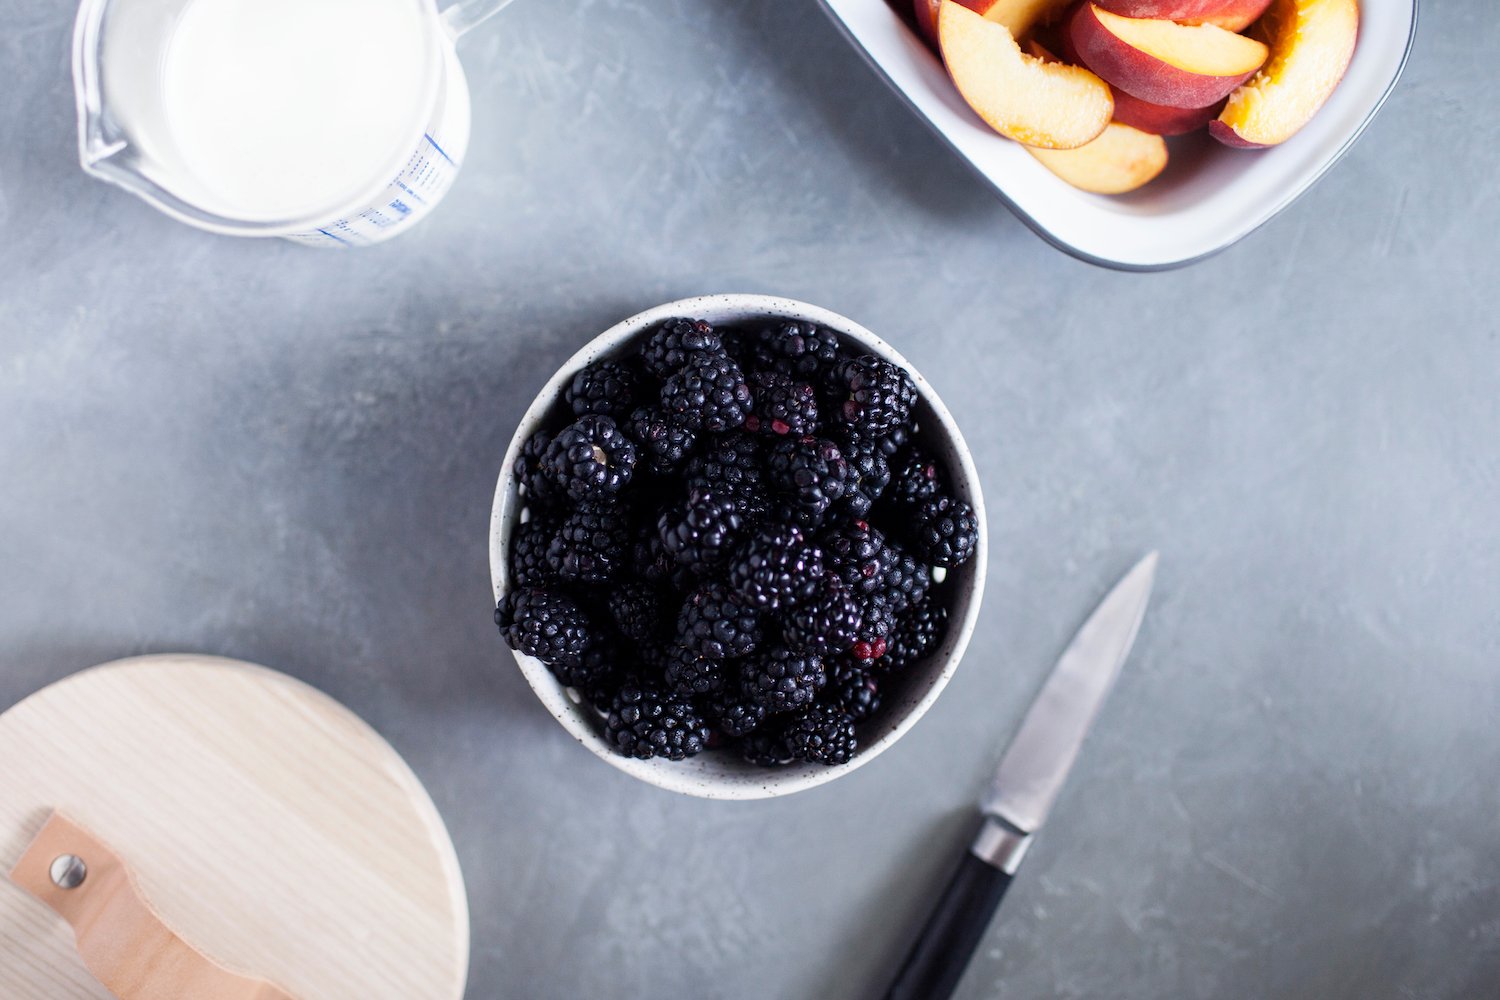 bowl of blackberries and a bowl of sliced peaches on a table